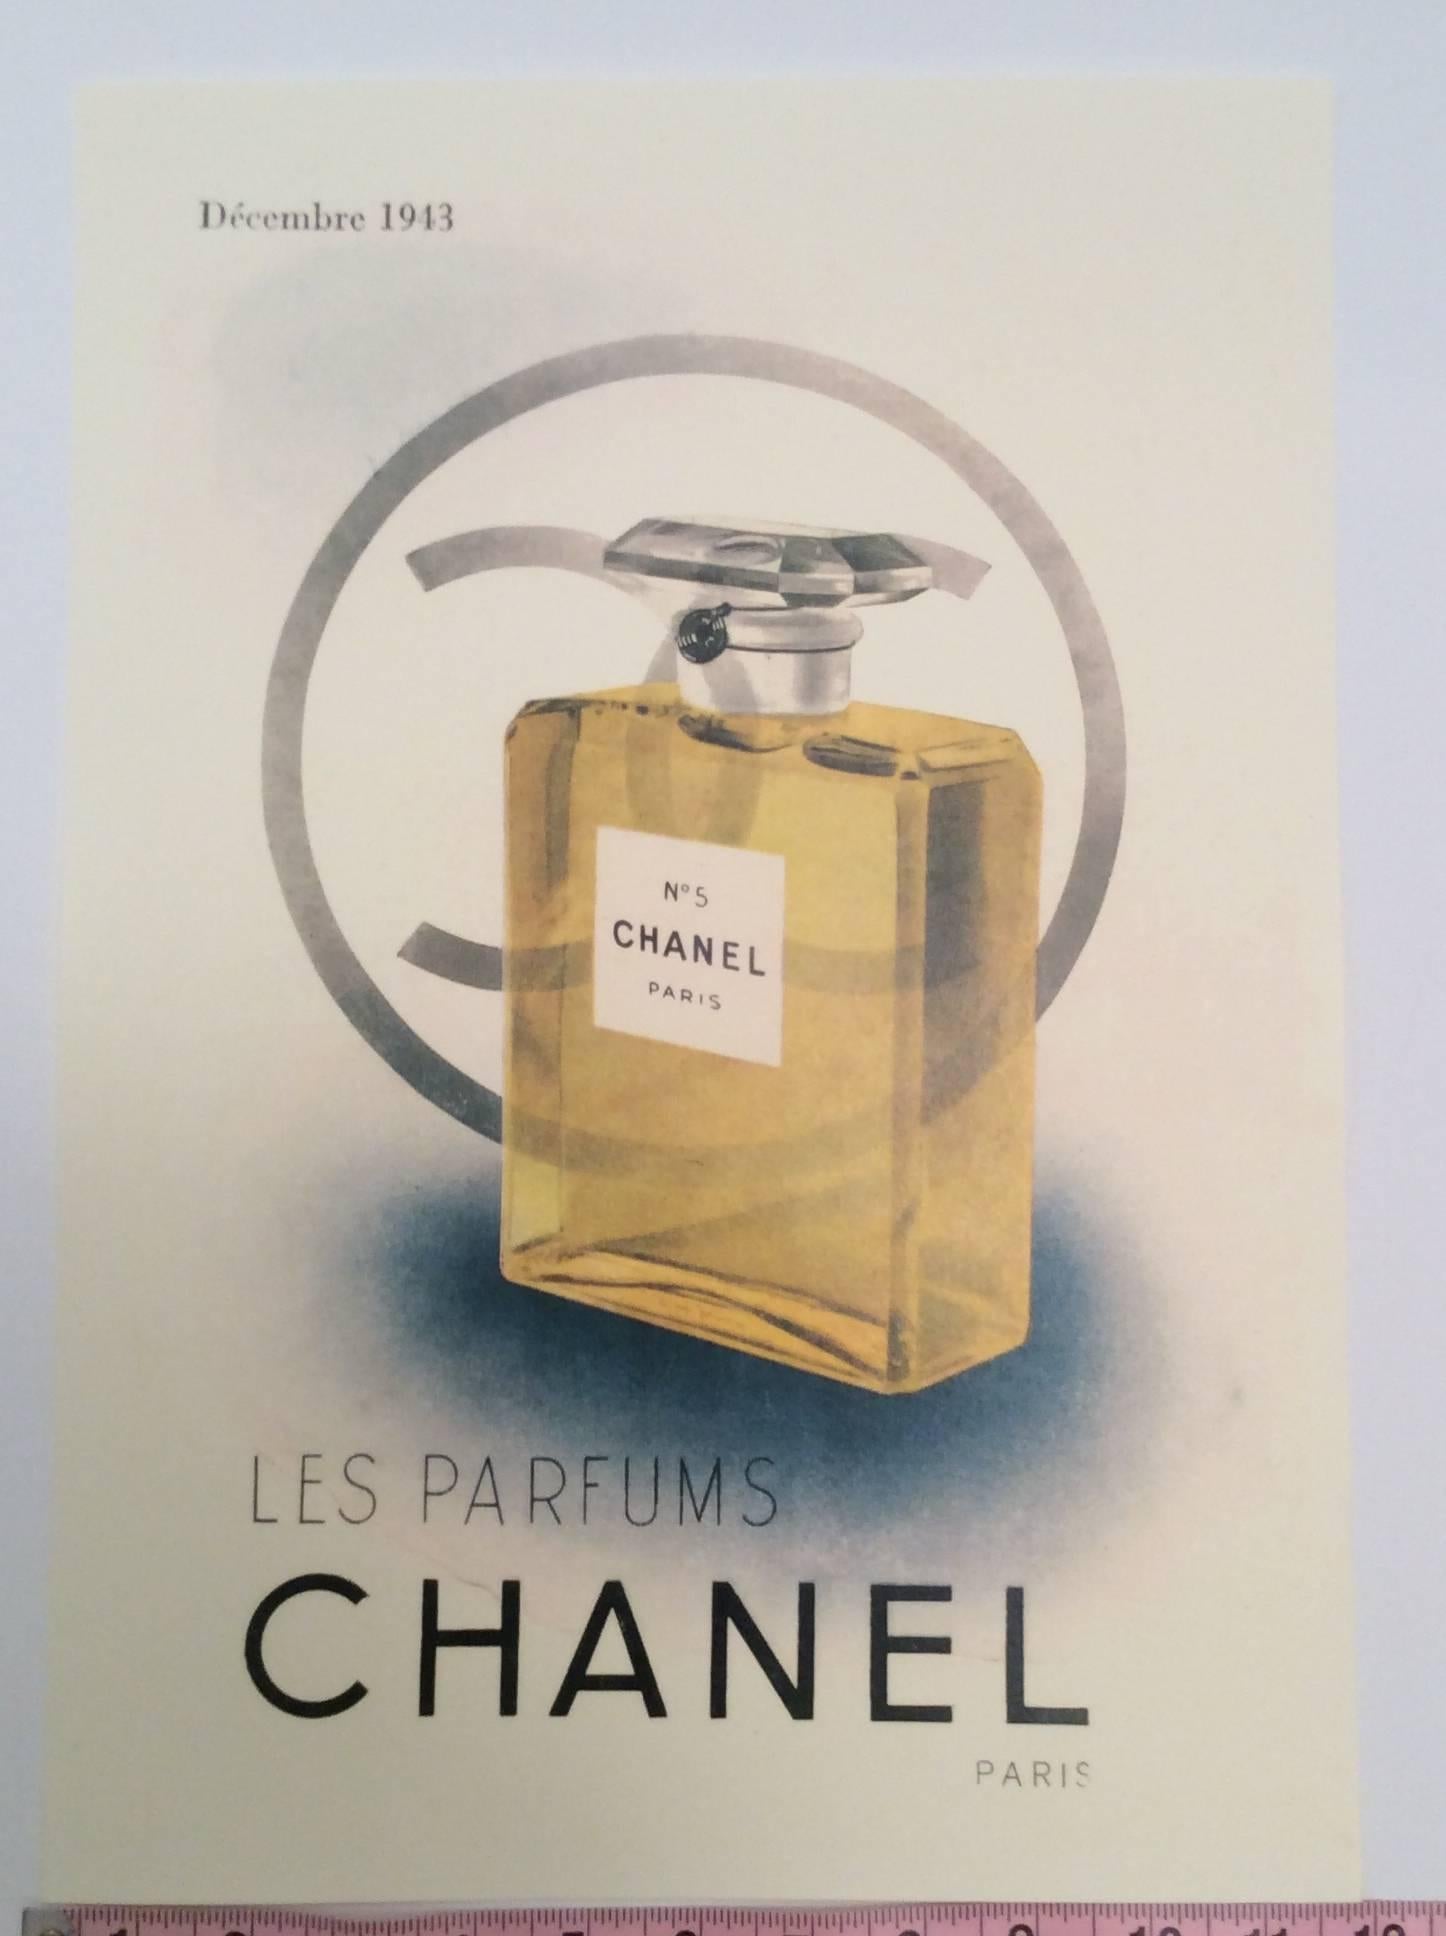 This beautiful print of an ad from the 1940's for Chanel is a gorgeous rendering of a perfume bottle in color. The ad is printed on professional print stock and makes for a perfect addition to any personal art or fashion collection. Excellent for